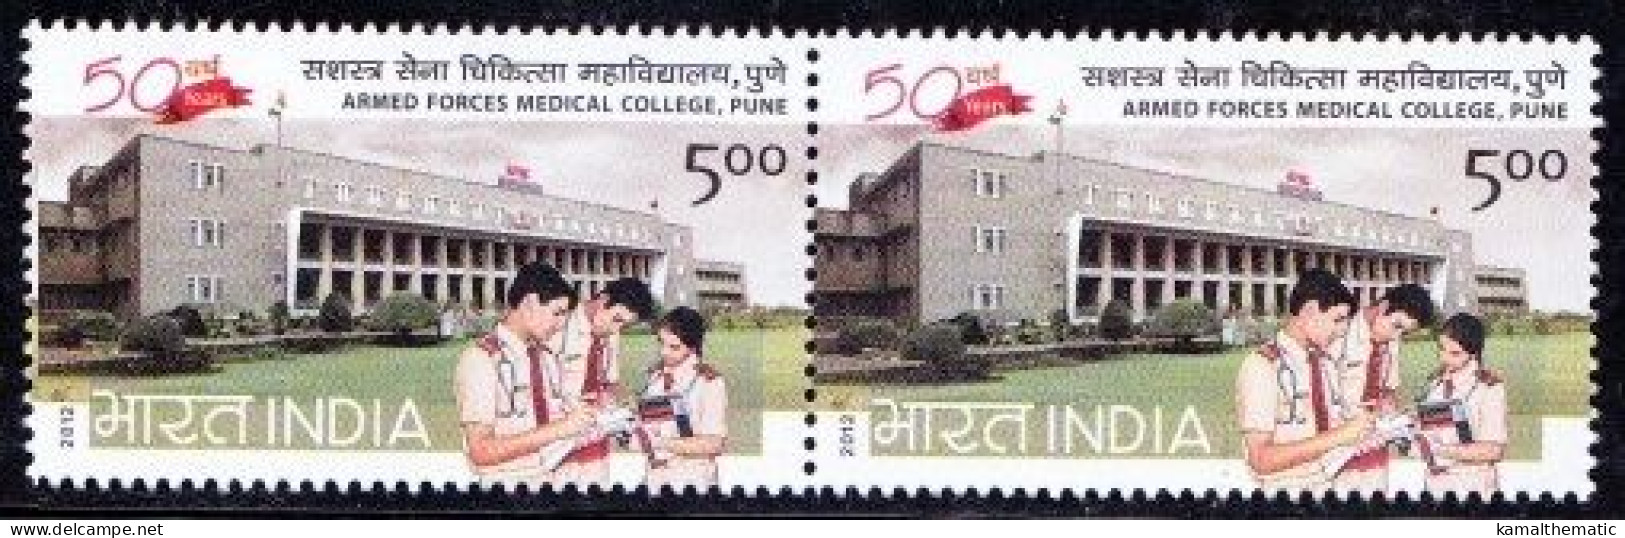 India 2012 MNH Pair, Armed Forces, Medical College, Stethoscope, - Medicina